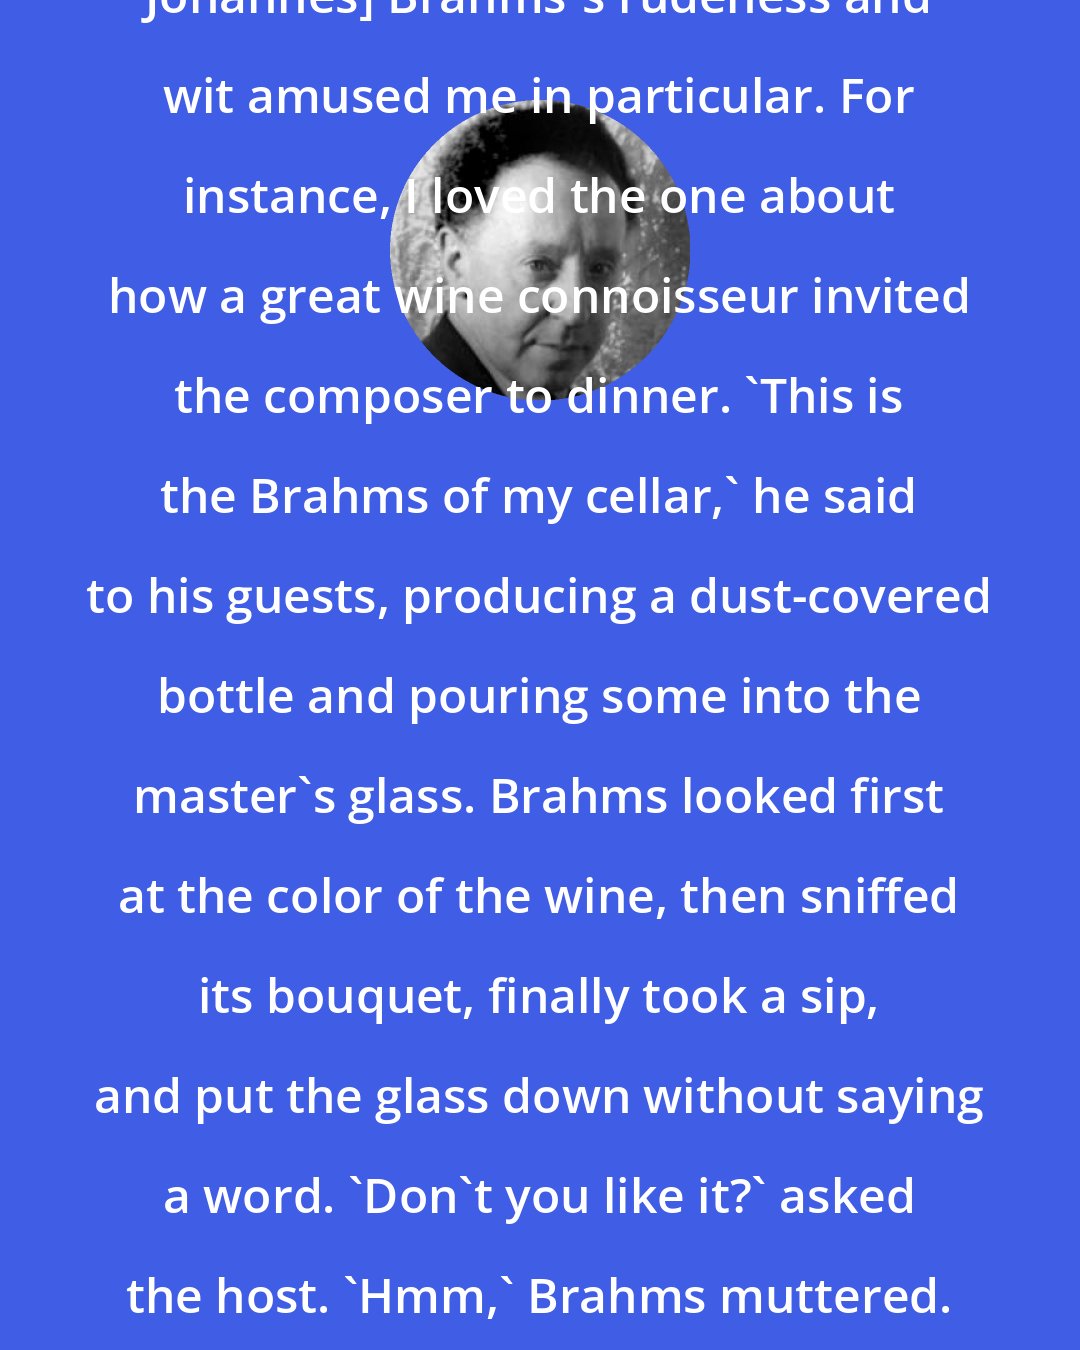 Arthur Rubinstein: ...stories about [the German composer Johannes] Brahms's rudeness and wit amused me in particular. For instance, I loved the one about how a great wine connoisseur invited the composer to dinner. 'This is the Brahms of my cellar,' he said to his guests, producing a dust-covered bottle and pouring some into the master's glass. Brahms looked first at the color of the wine, then sniffed its bouquet, finally took a sip, and put the glass down without saying a word. 'Don't you like it?' asked the host. 'Hmm,' Brahms muttered. 'Better bring your Beethoven!'